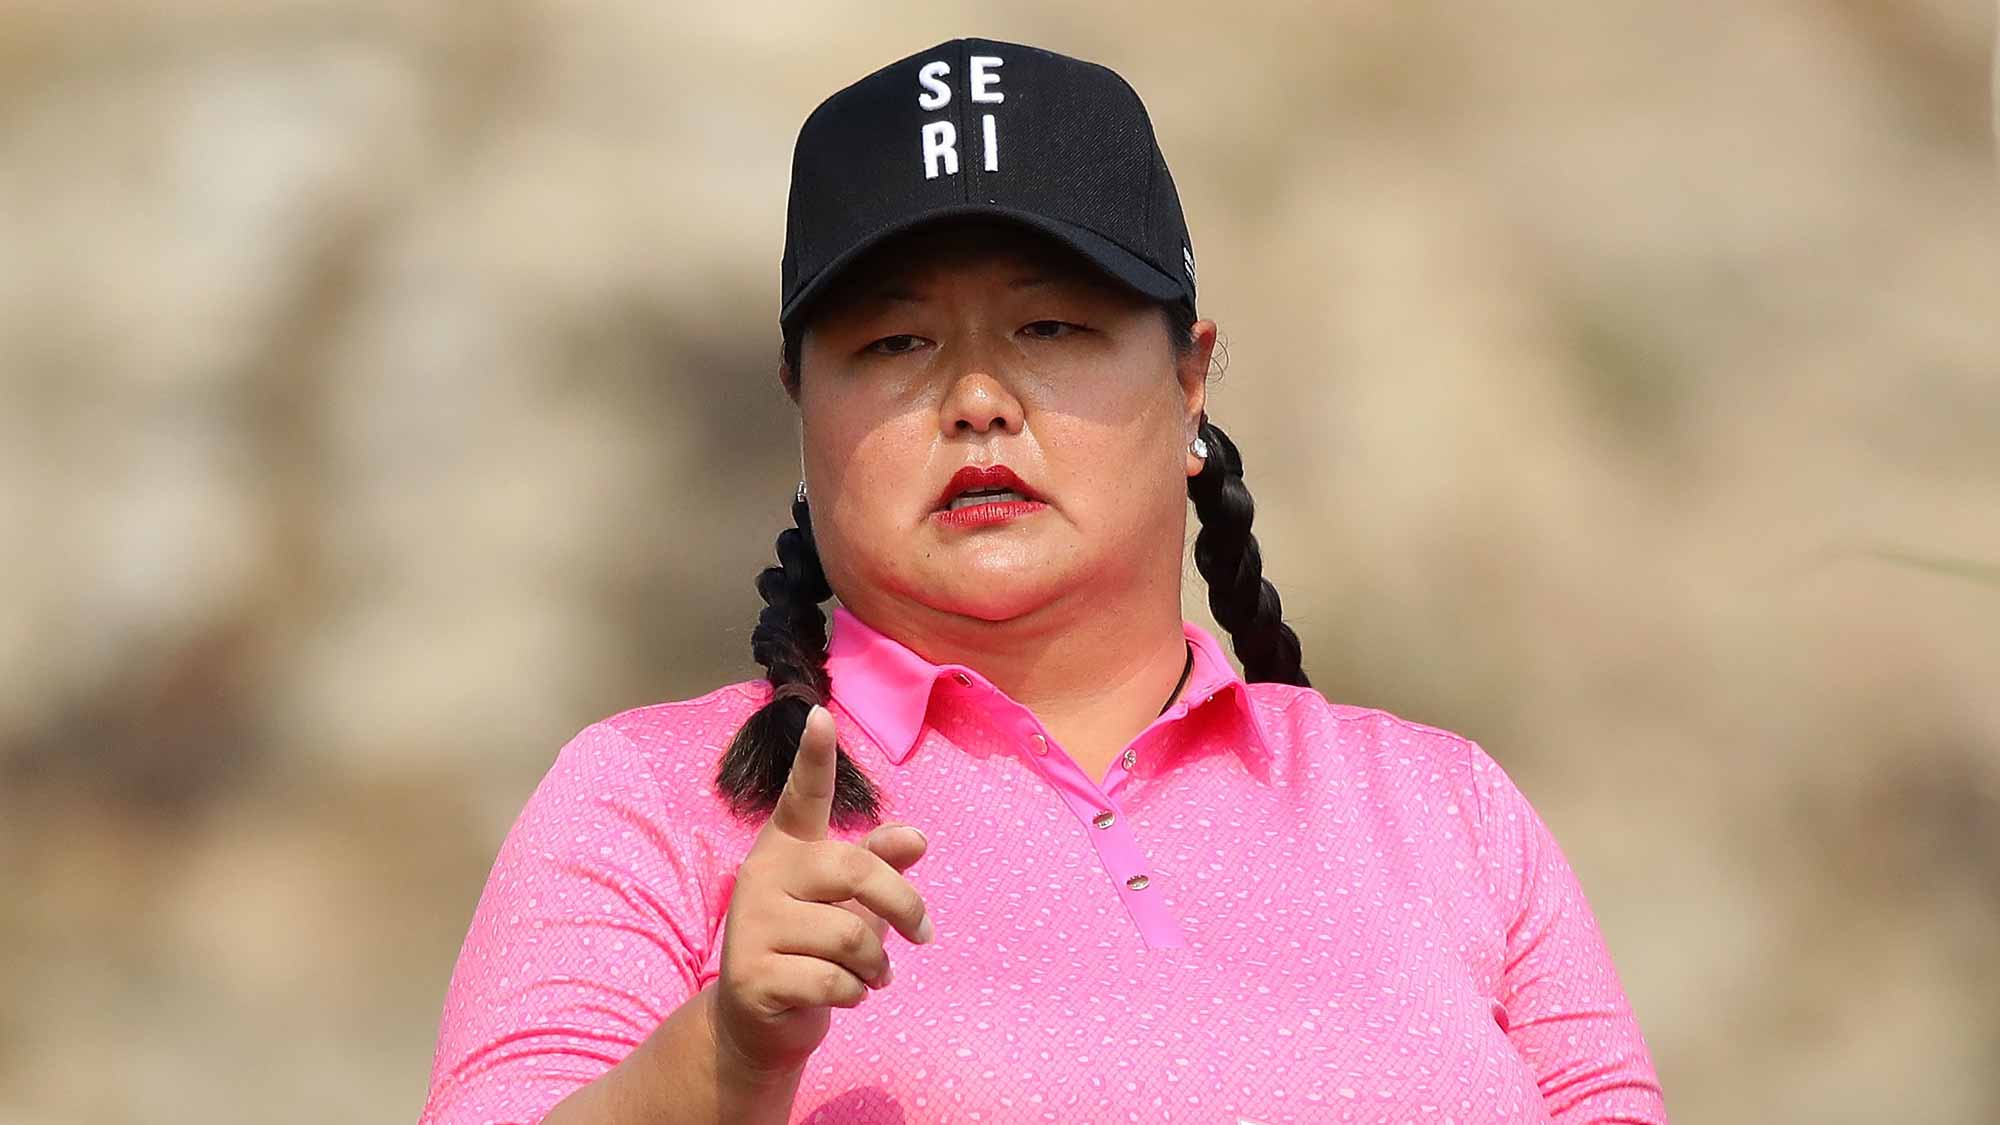 Christina Kim of United States wear Se-Ri Pak's hat on the 2nd hole during the second round of the LPGA KEB-Hana Bank Championship at the Sky 72 Golf Club Ocean Course